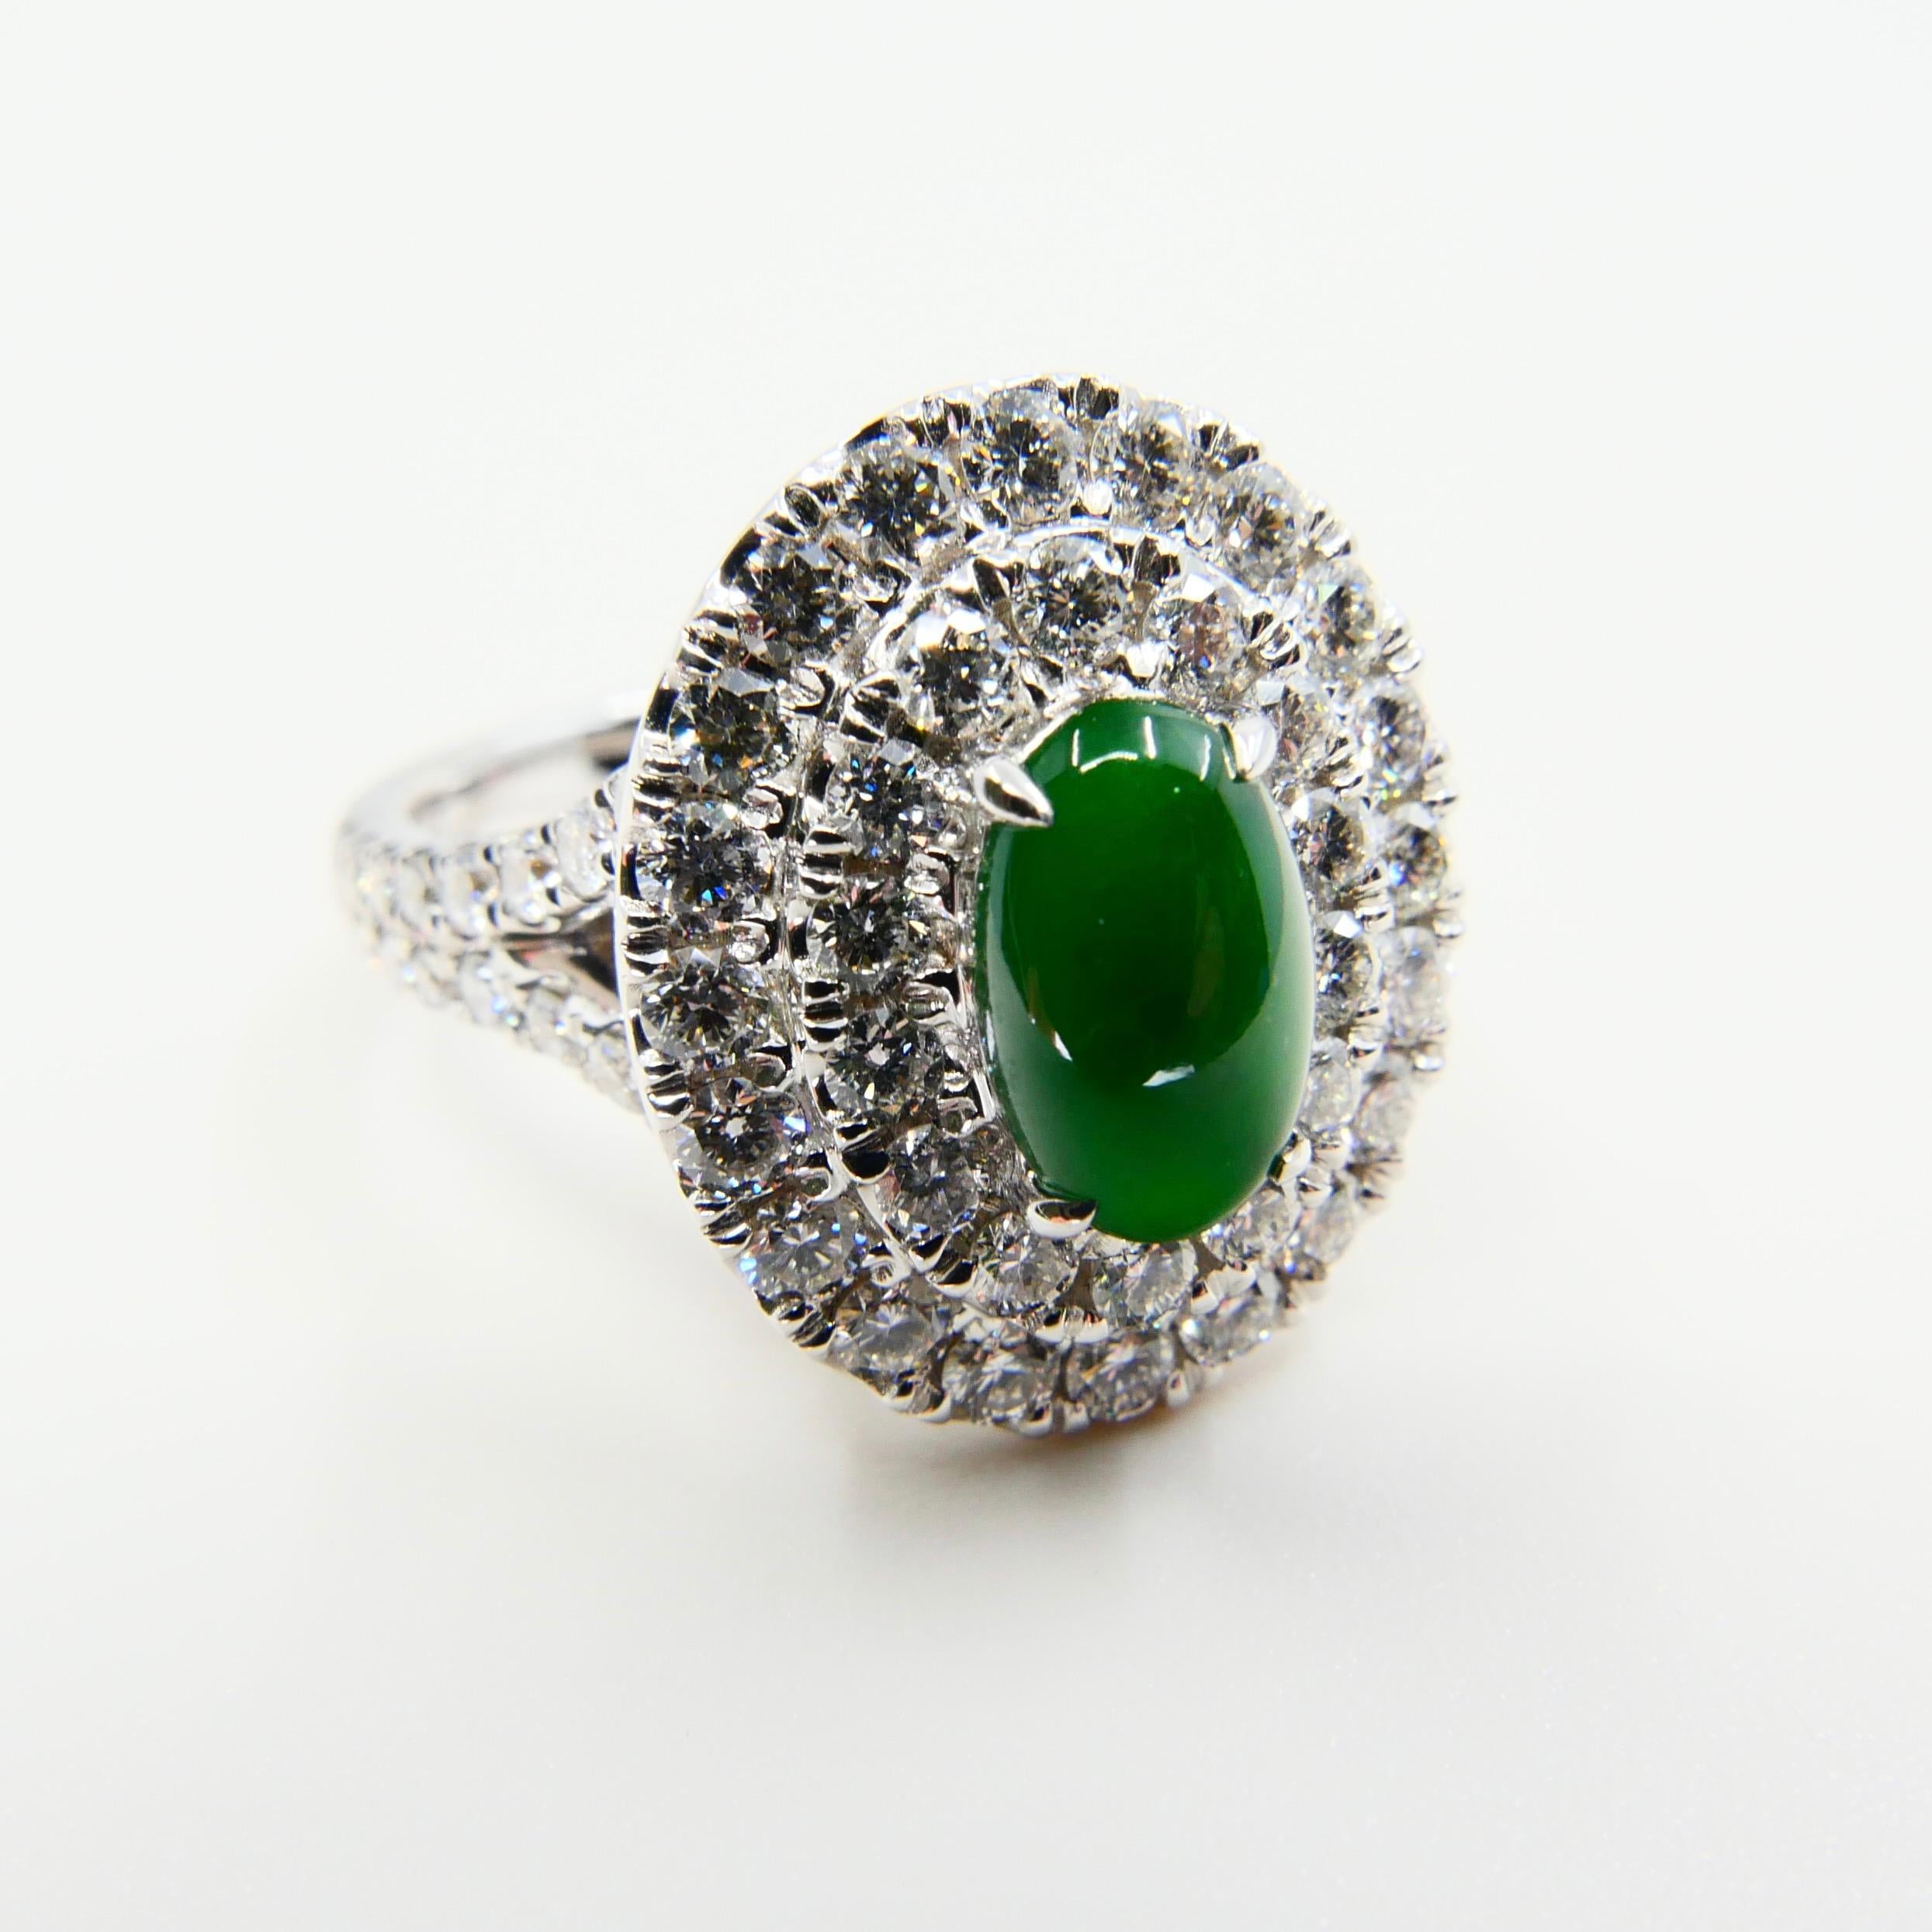 Certified Type A Jadeite Jade and Diamond Cocktail Ring, Close to Imperial Jade 8